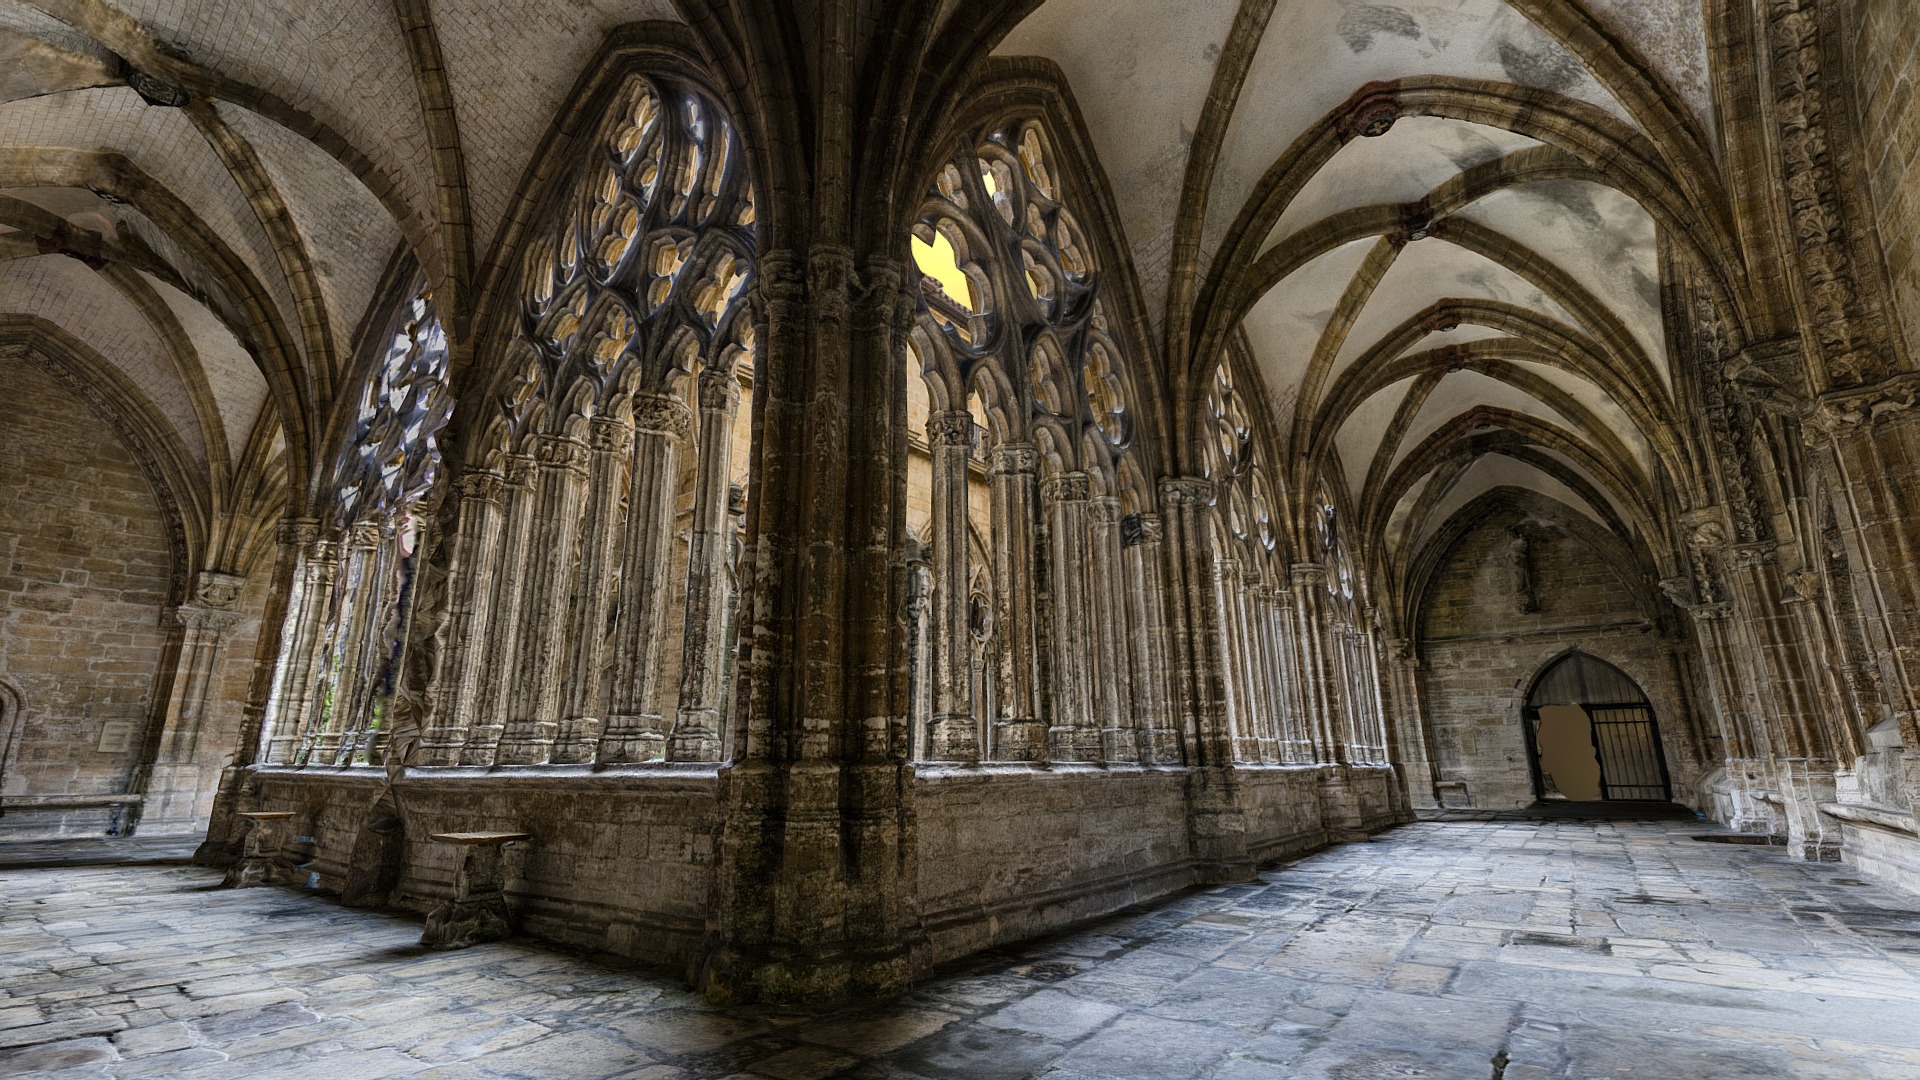 3D model Gothic cloister photogrammetry scan - This is a 3D model of the Gothic cloister photogrammetry scan. The 3D model is about a large ornate building with arched windows.